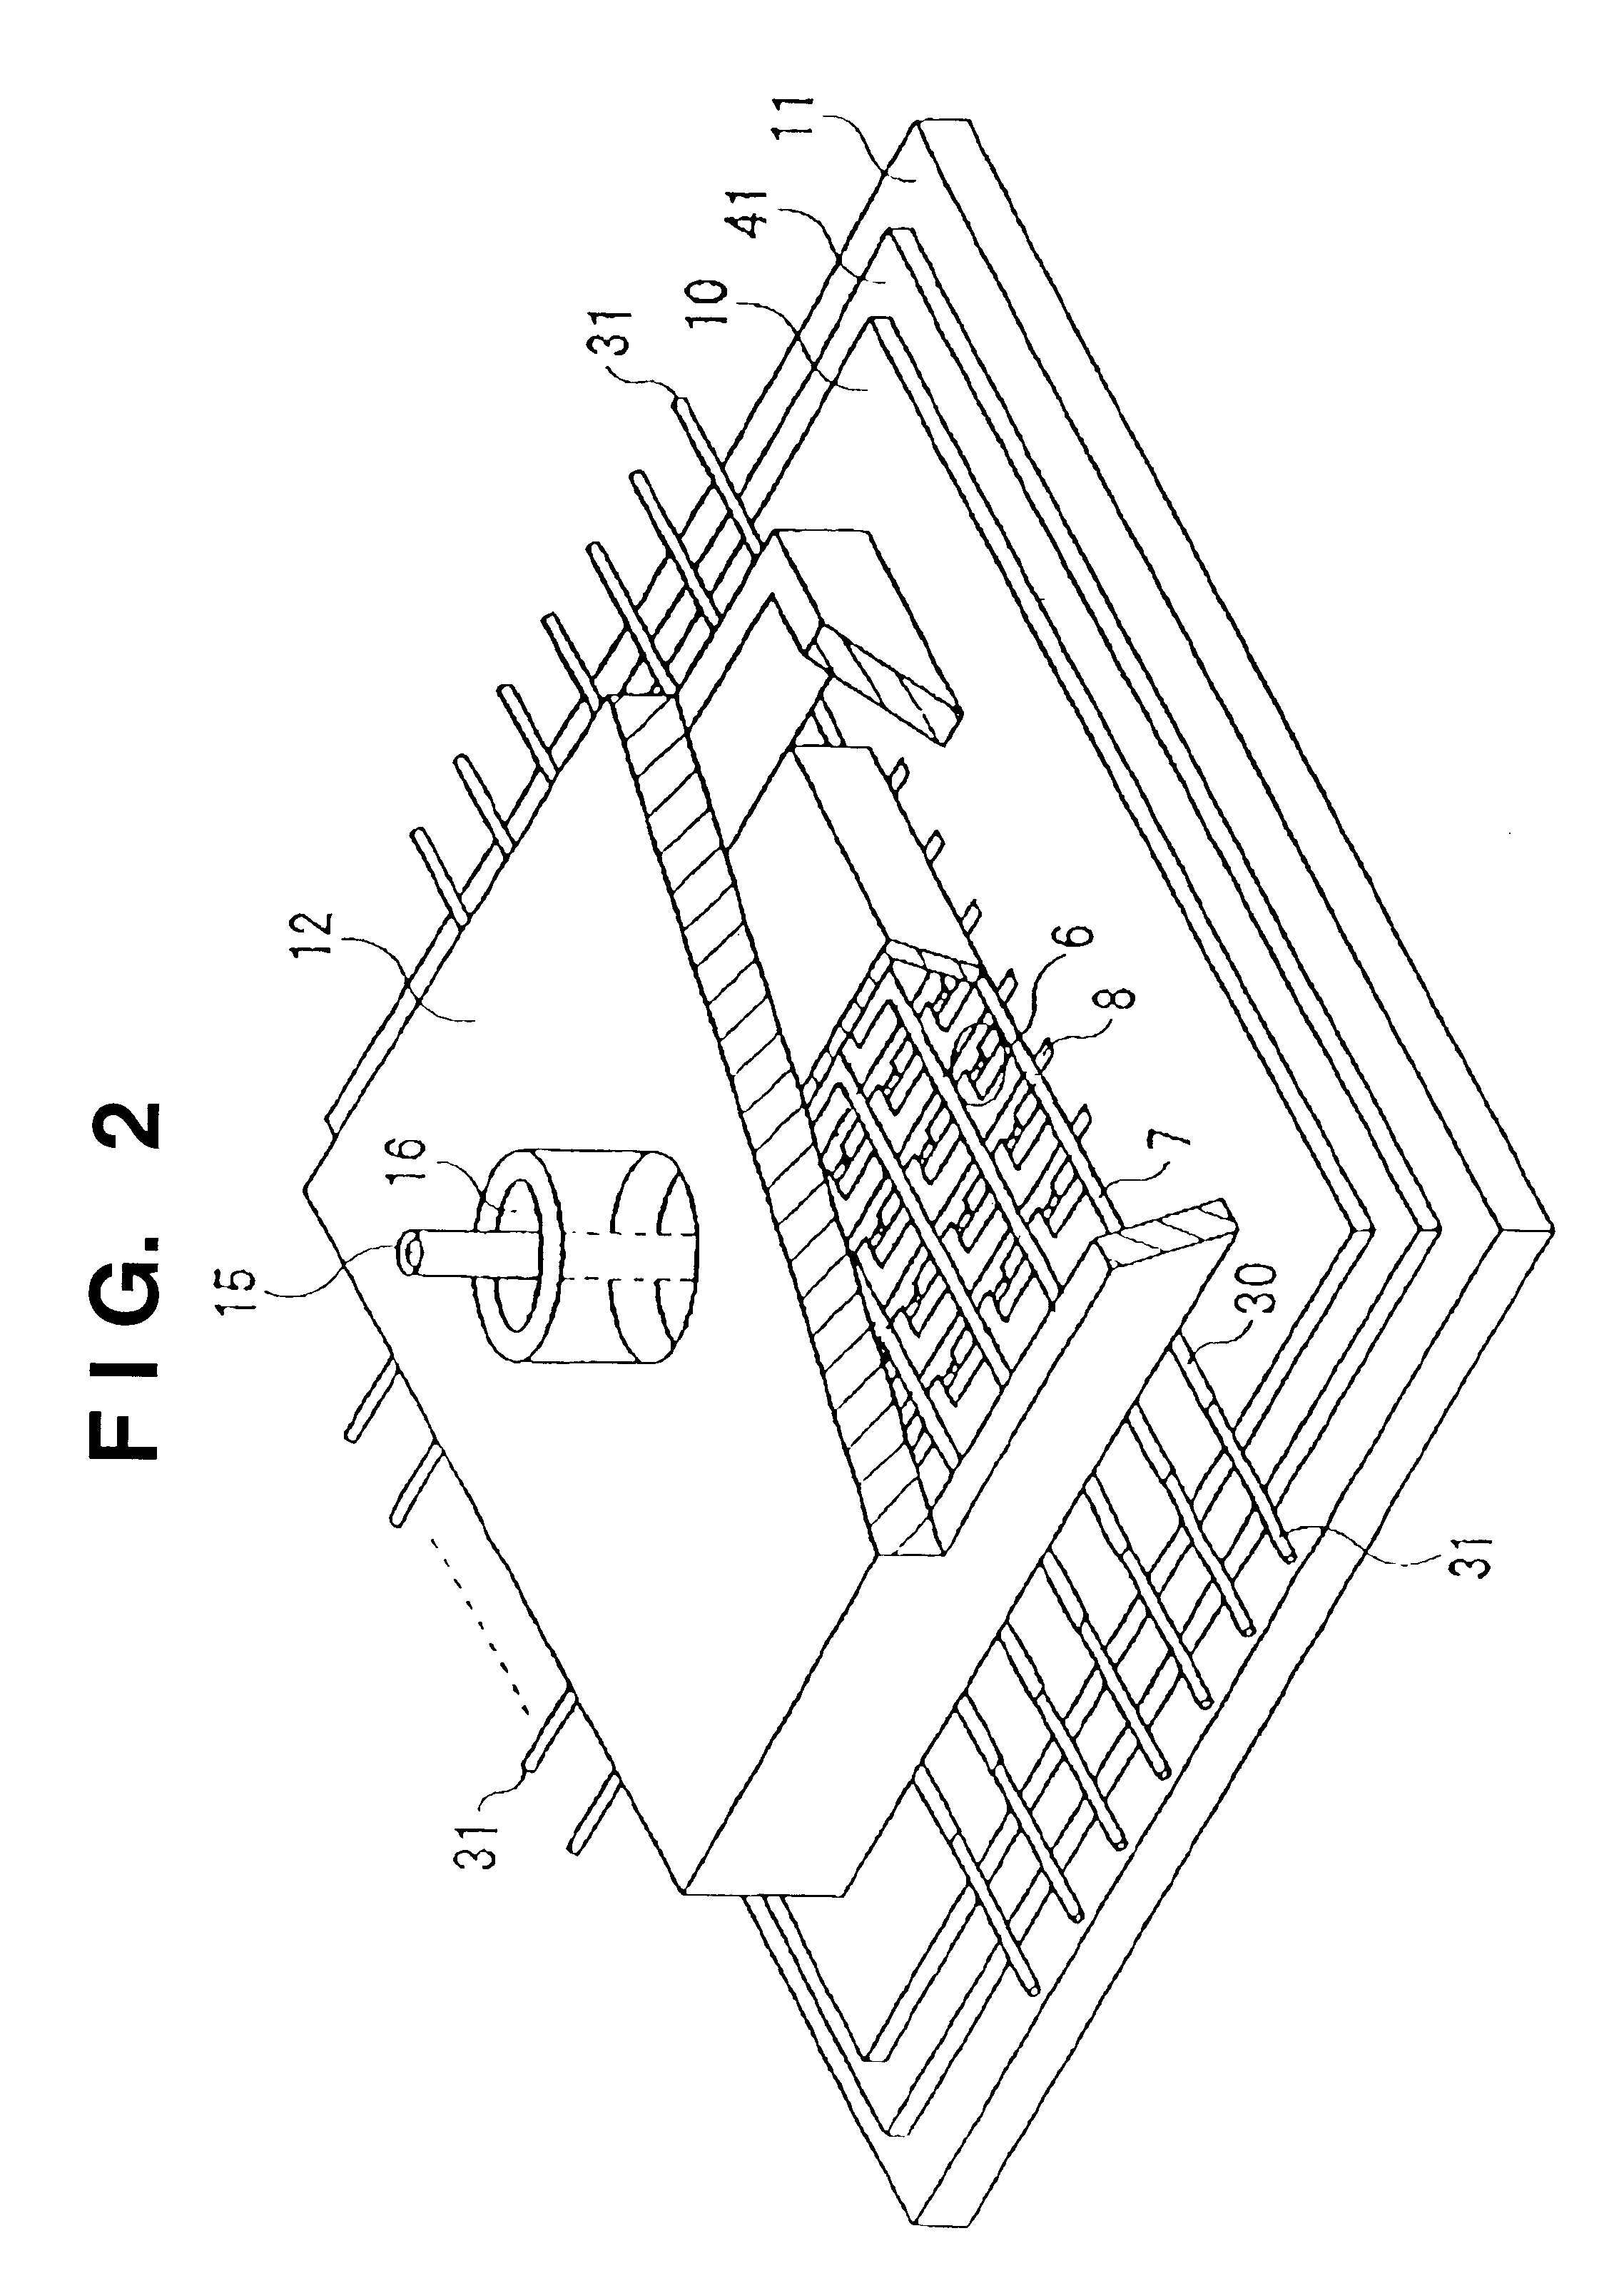 Apparatus for producing electron source